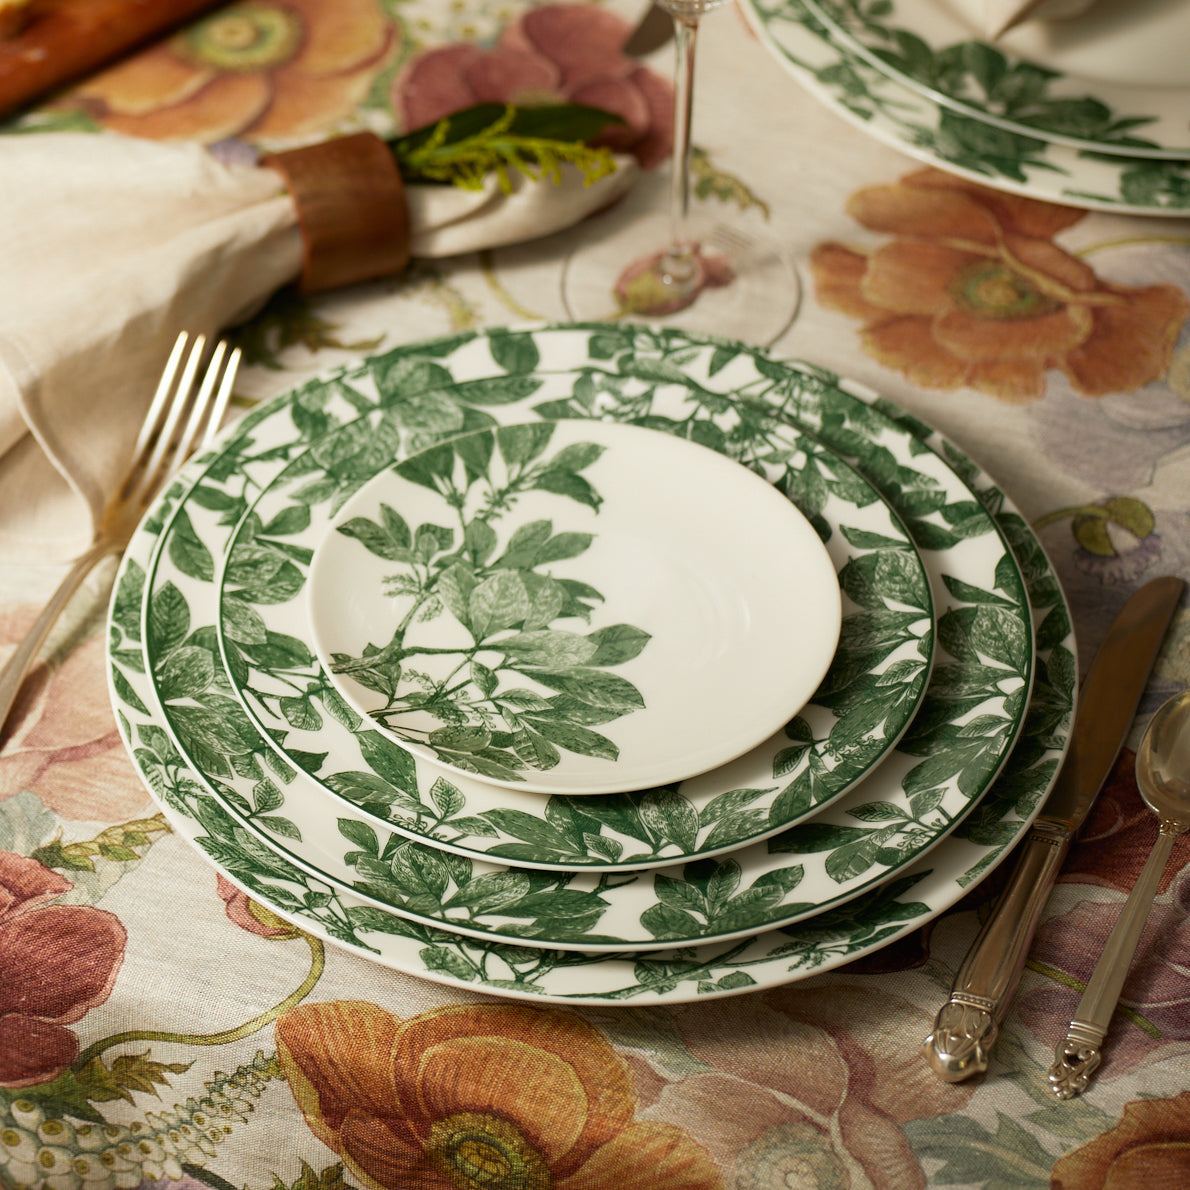 A set of Arbor Green Rimmed Salad Plates by Caskata with green leaf patterns stacked on a floral tablecloth. Silverware and a napkin with a wooden ring are placed beside the salad plates.